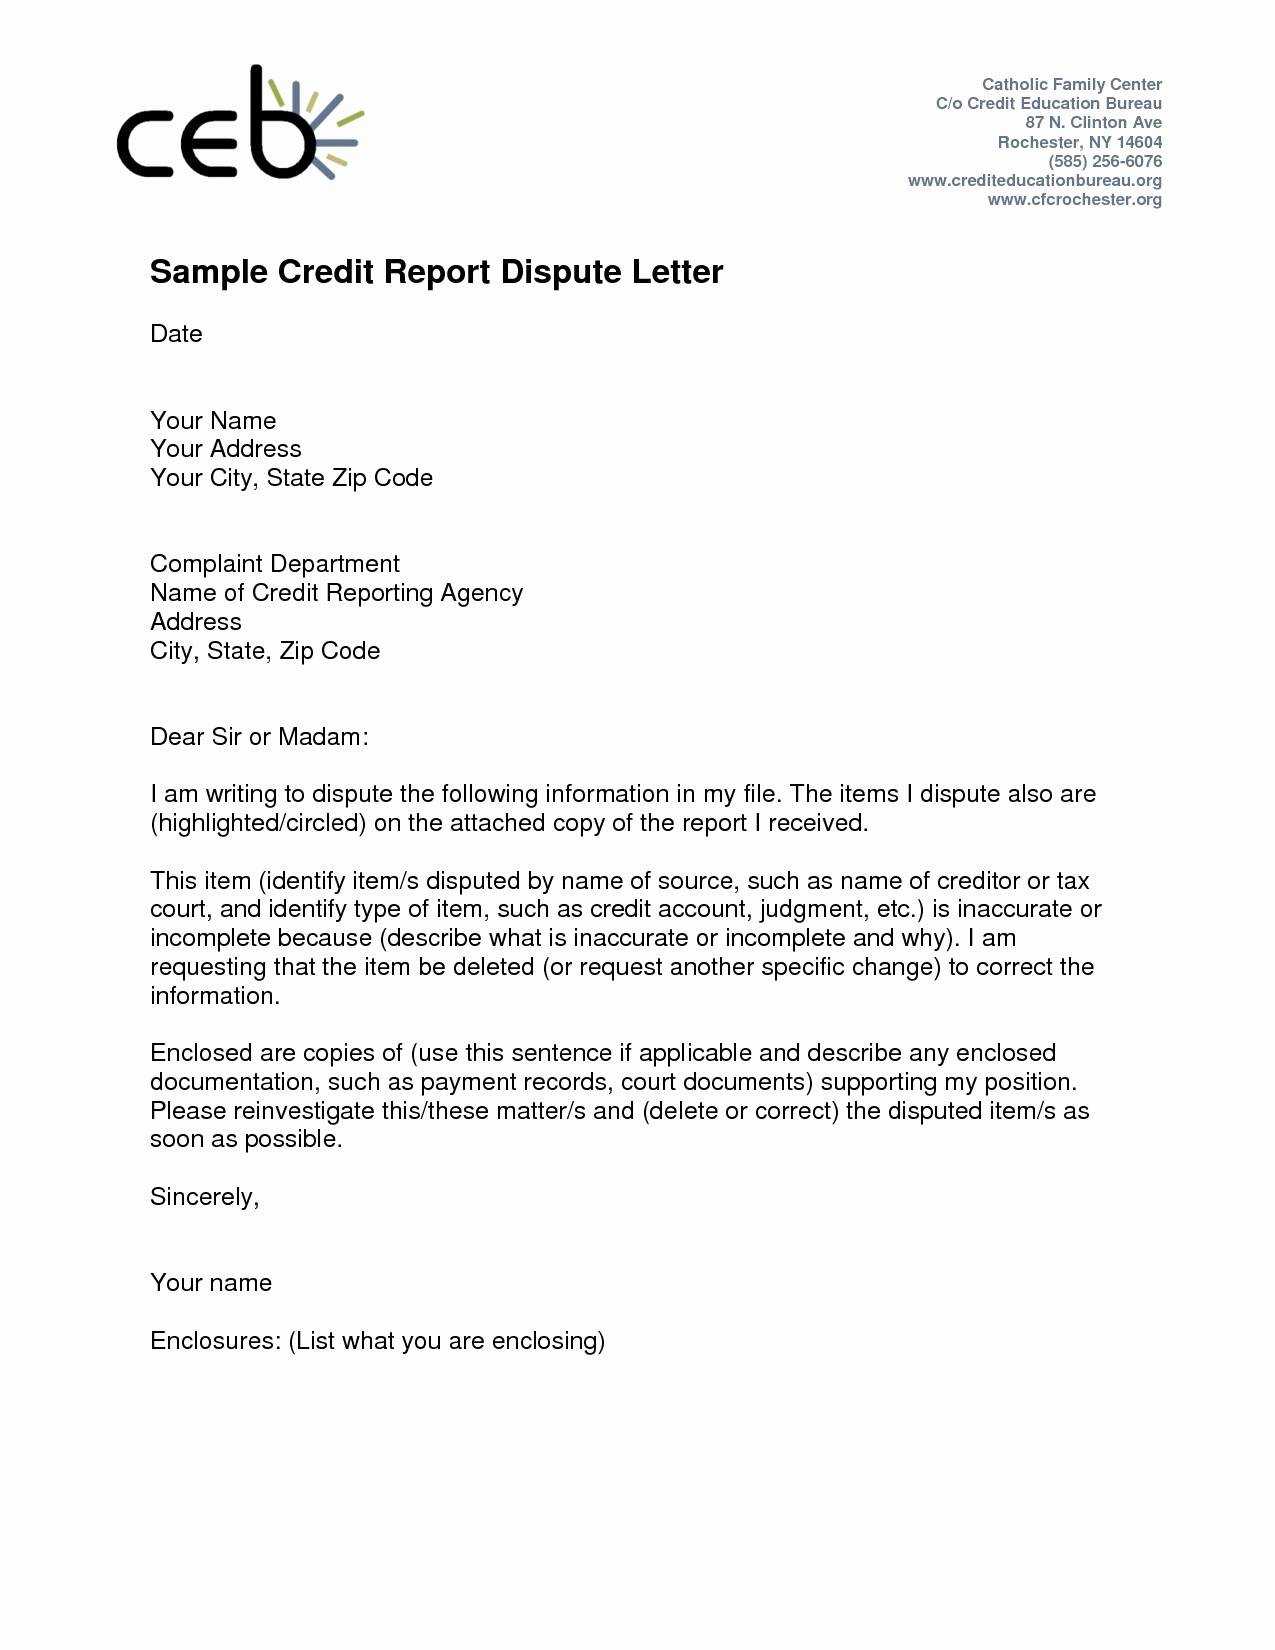 Template For Credit Report Dispute Letter Samples | Letter Inside Credit Report Dispute Letter Template